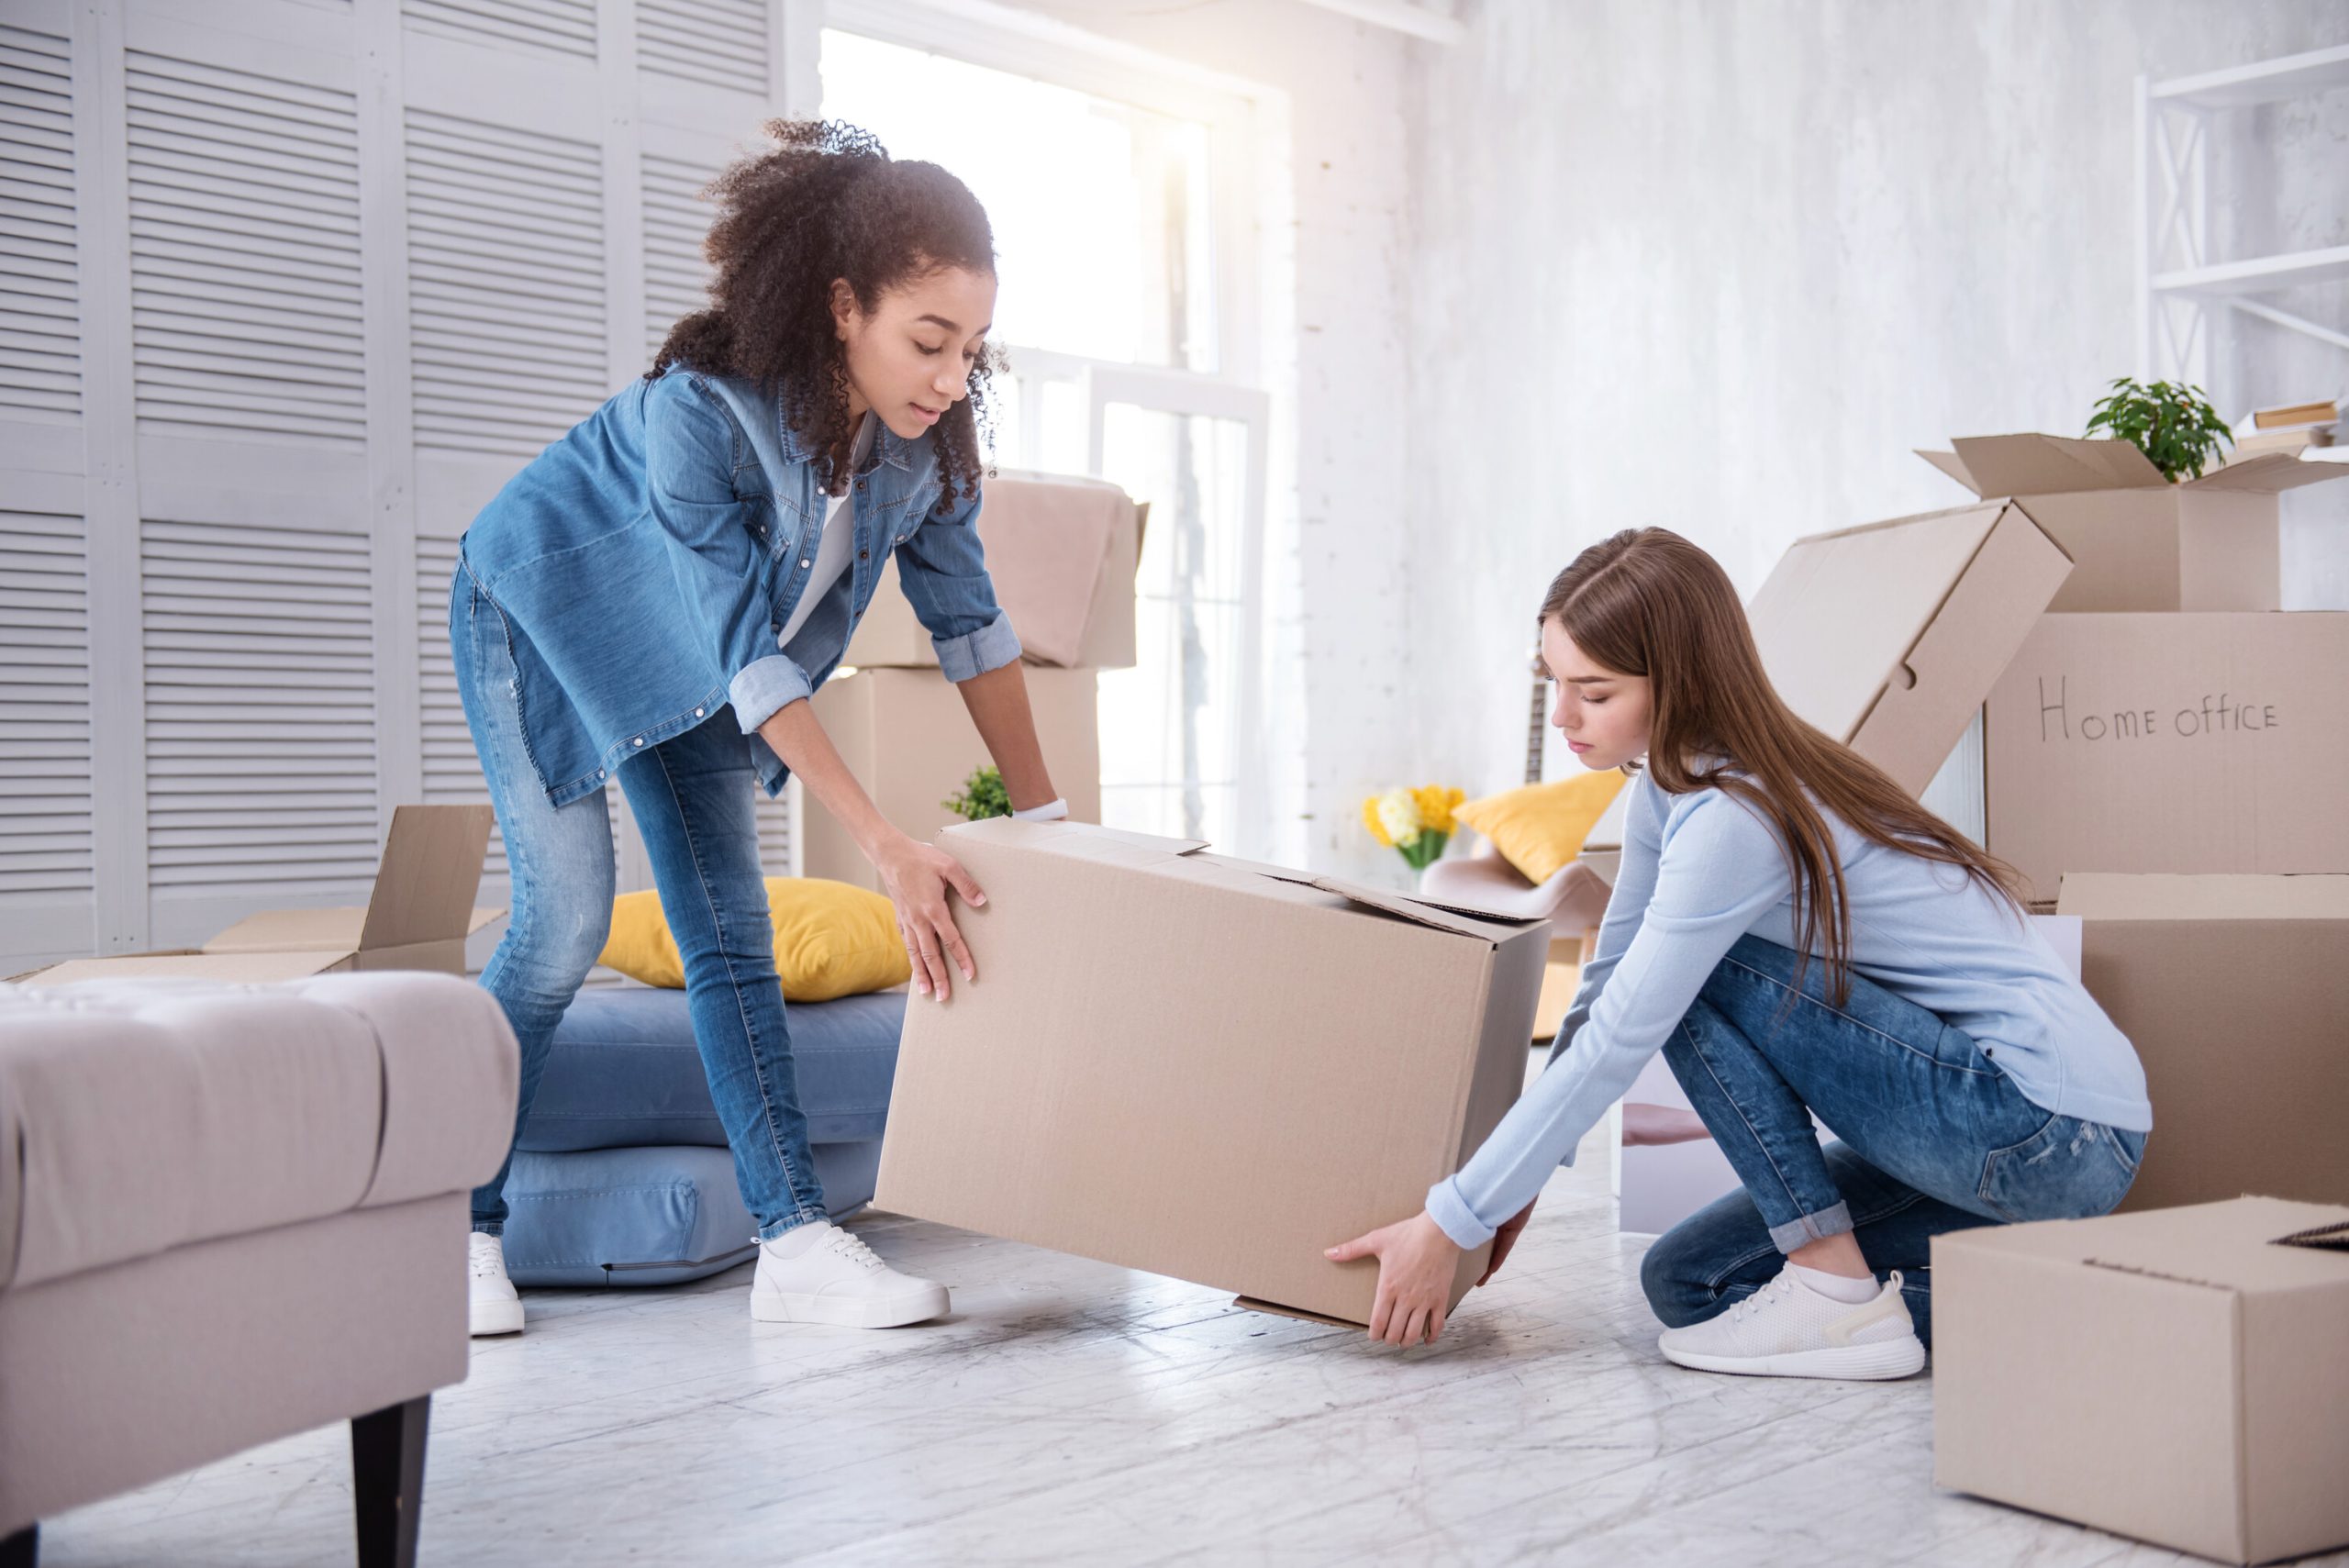 Two young women with long brown hair and dressed in jeans lift a moving box in a living room with numerous other moving boxes in the background.